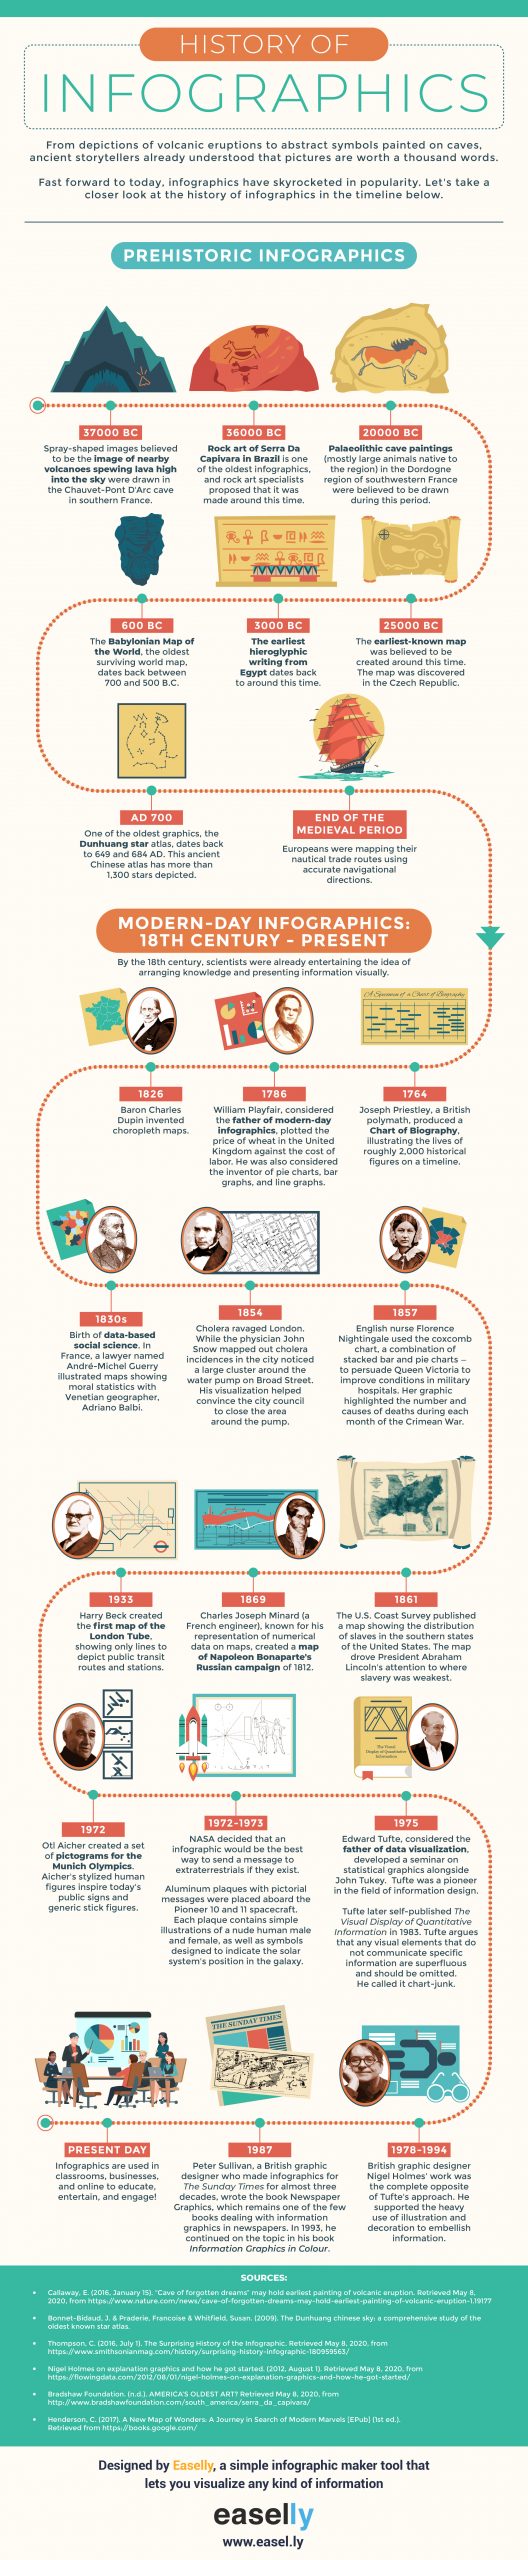 An infographic about the history of infographics